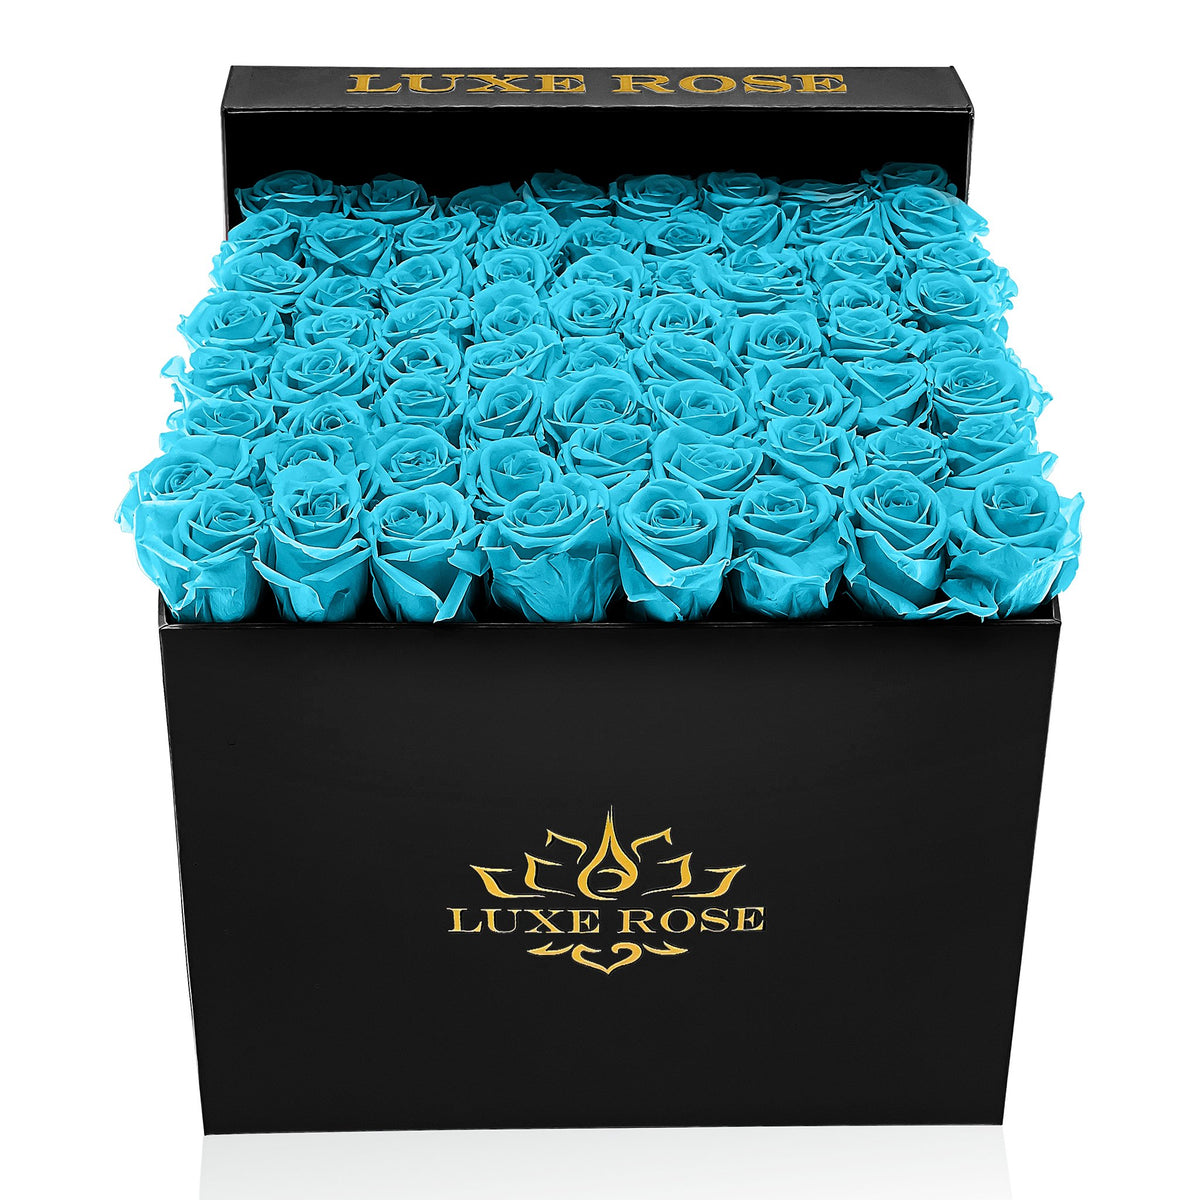 Preserved Roses Large Box | Bright Turquoise - Black - Roses